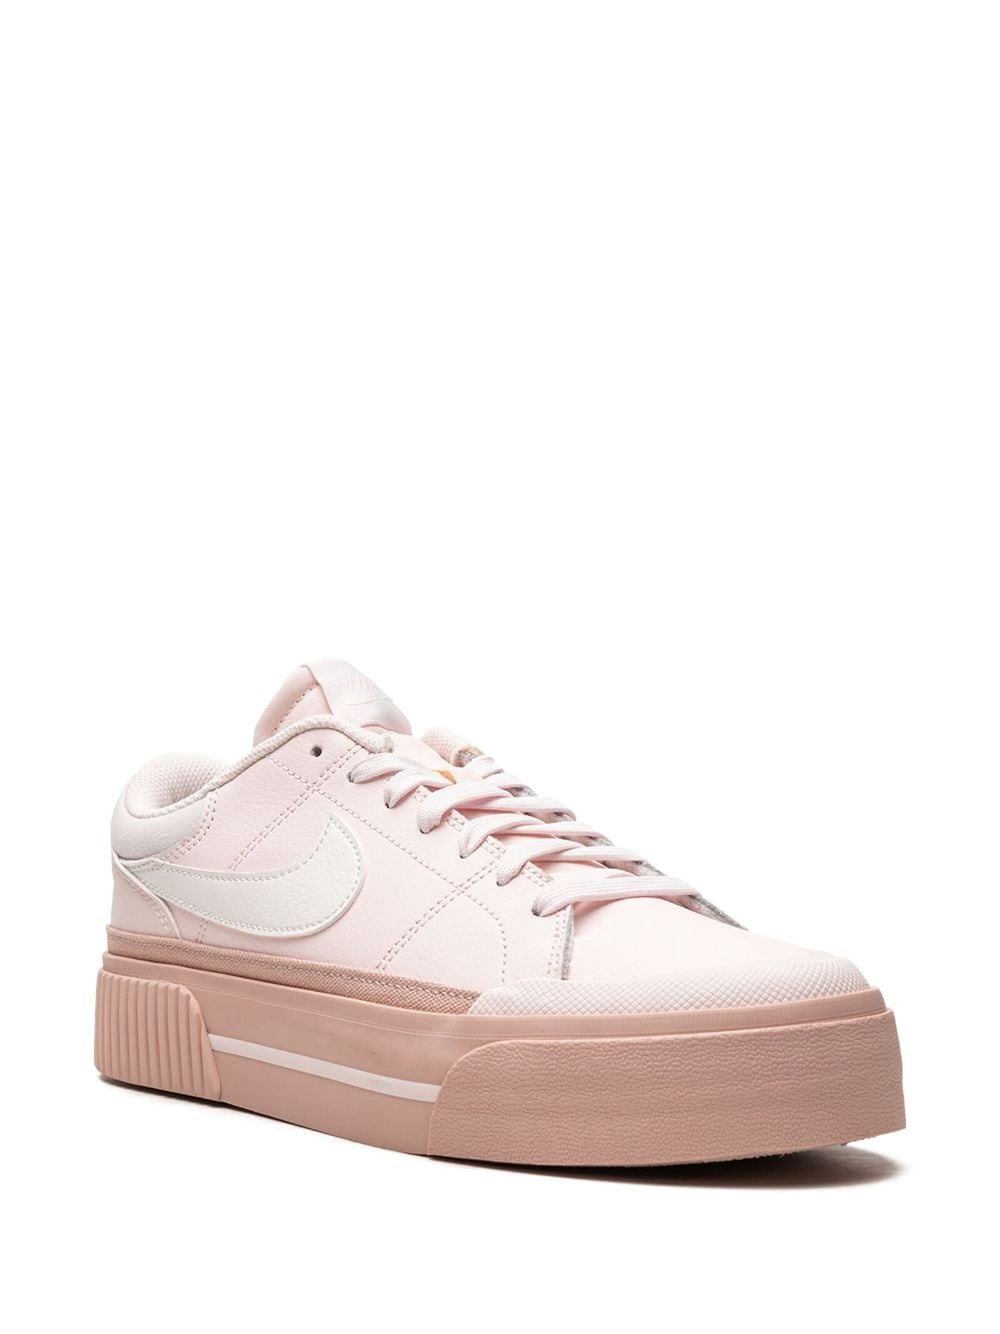 Court Legacy Lift "Light Soft Pink" sneakers - 2